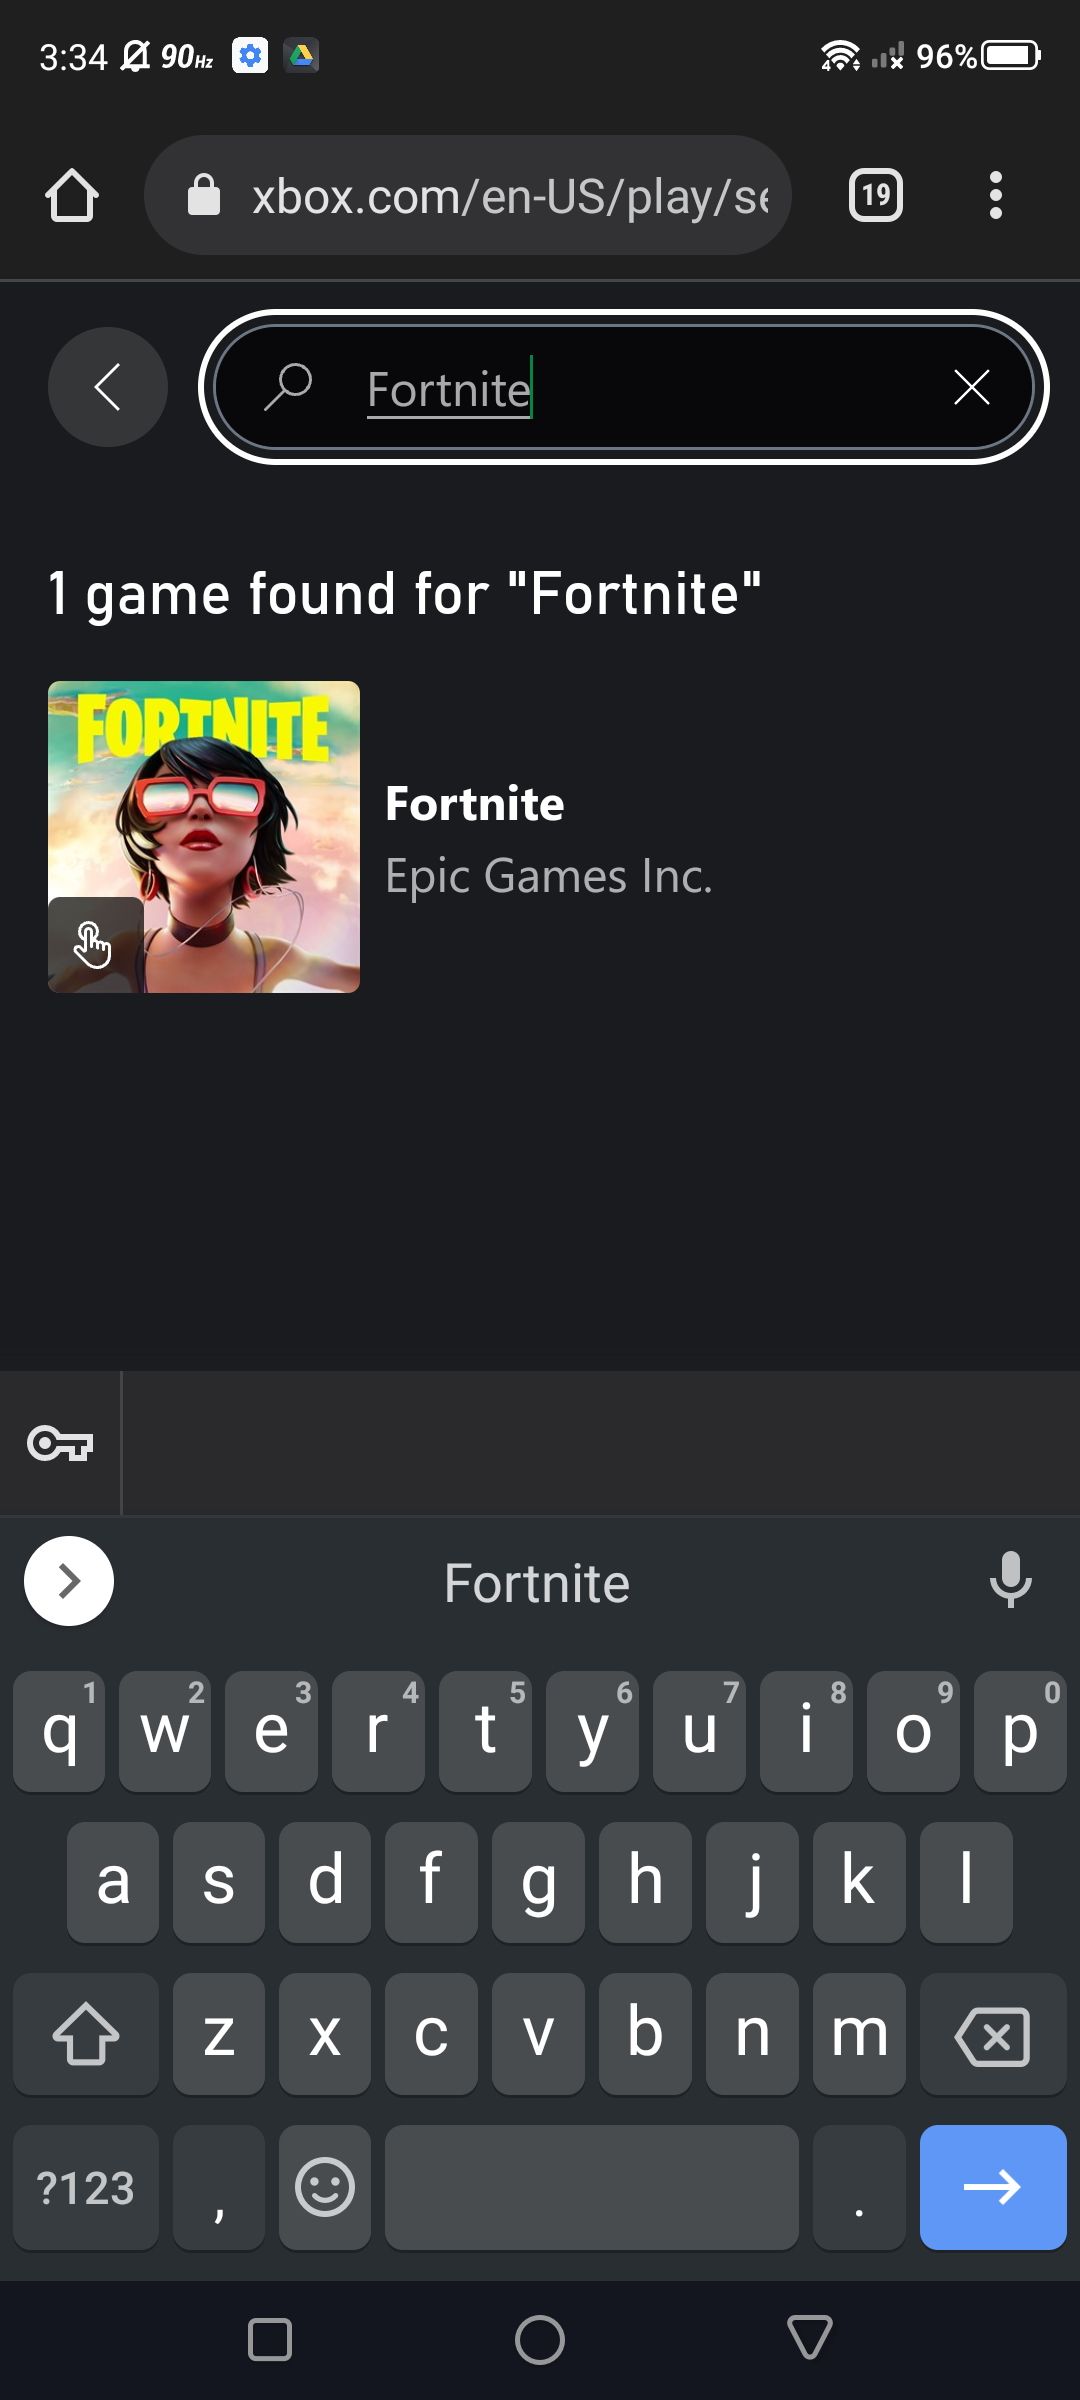 Searching for Fortnite on xCloud